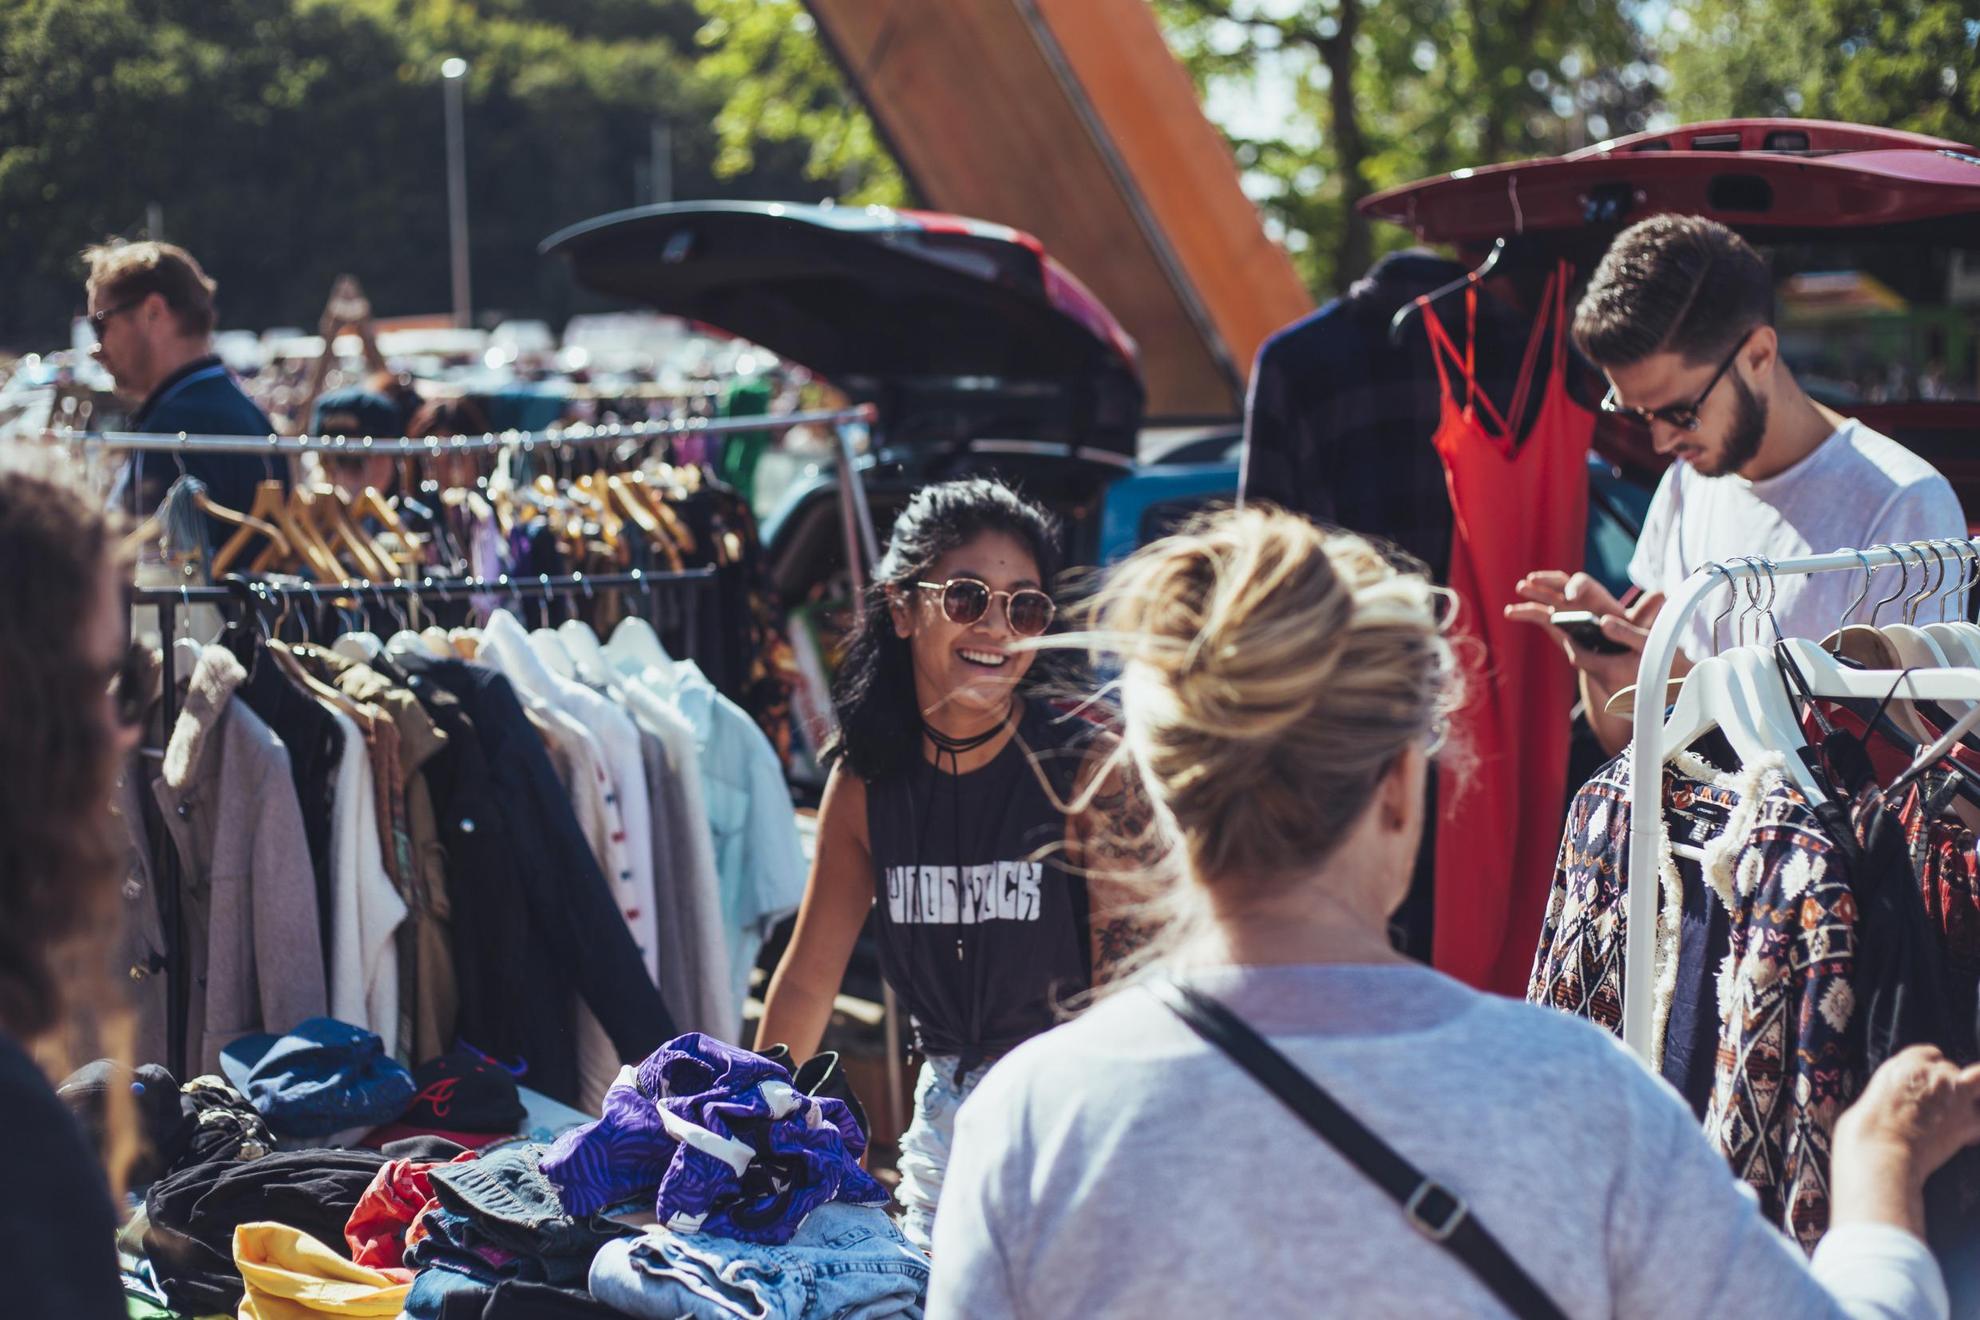 Shoppers are perusing clothes at an outdoors flea market.